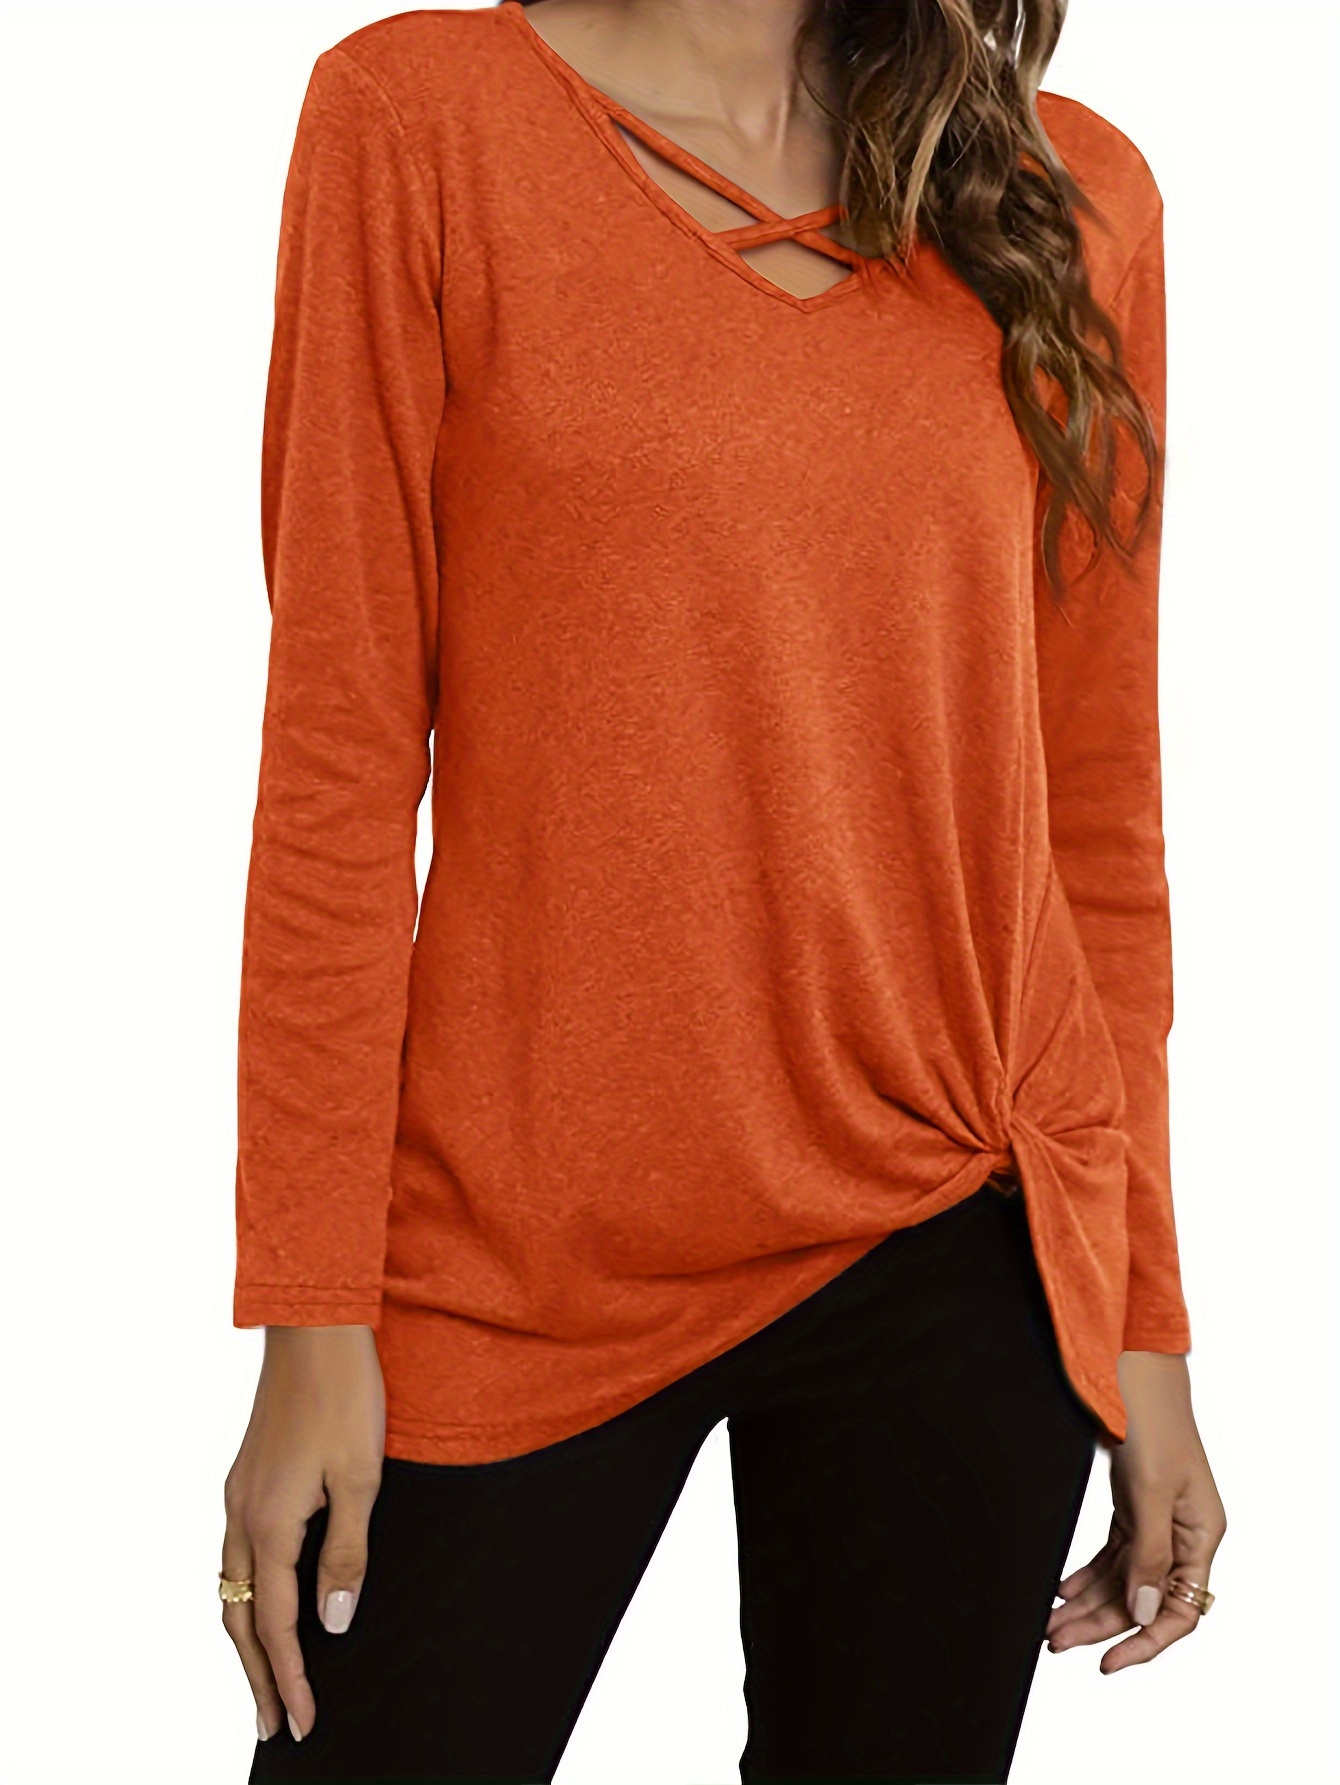 Solid Criss Cross Neck T-shirt, Casual Knot Long Sleeve Top For Spring &  Fall, Women's Clothing